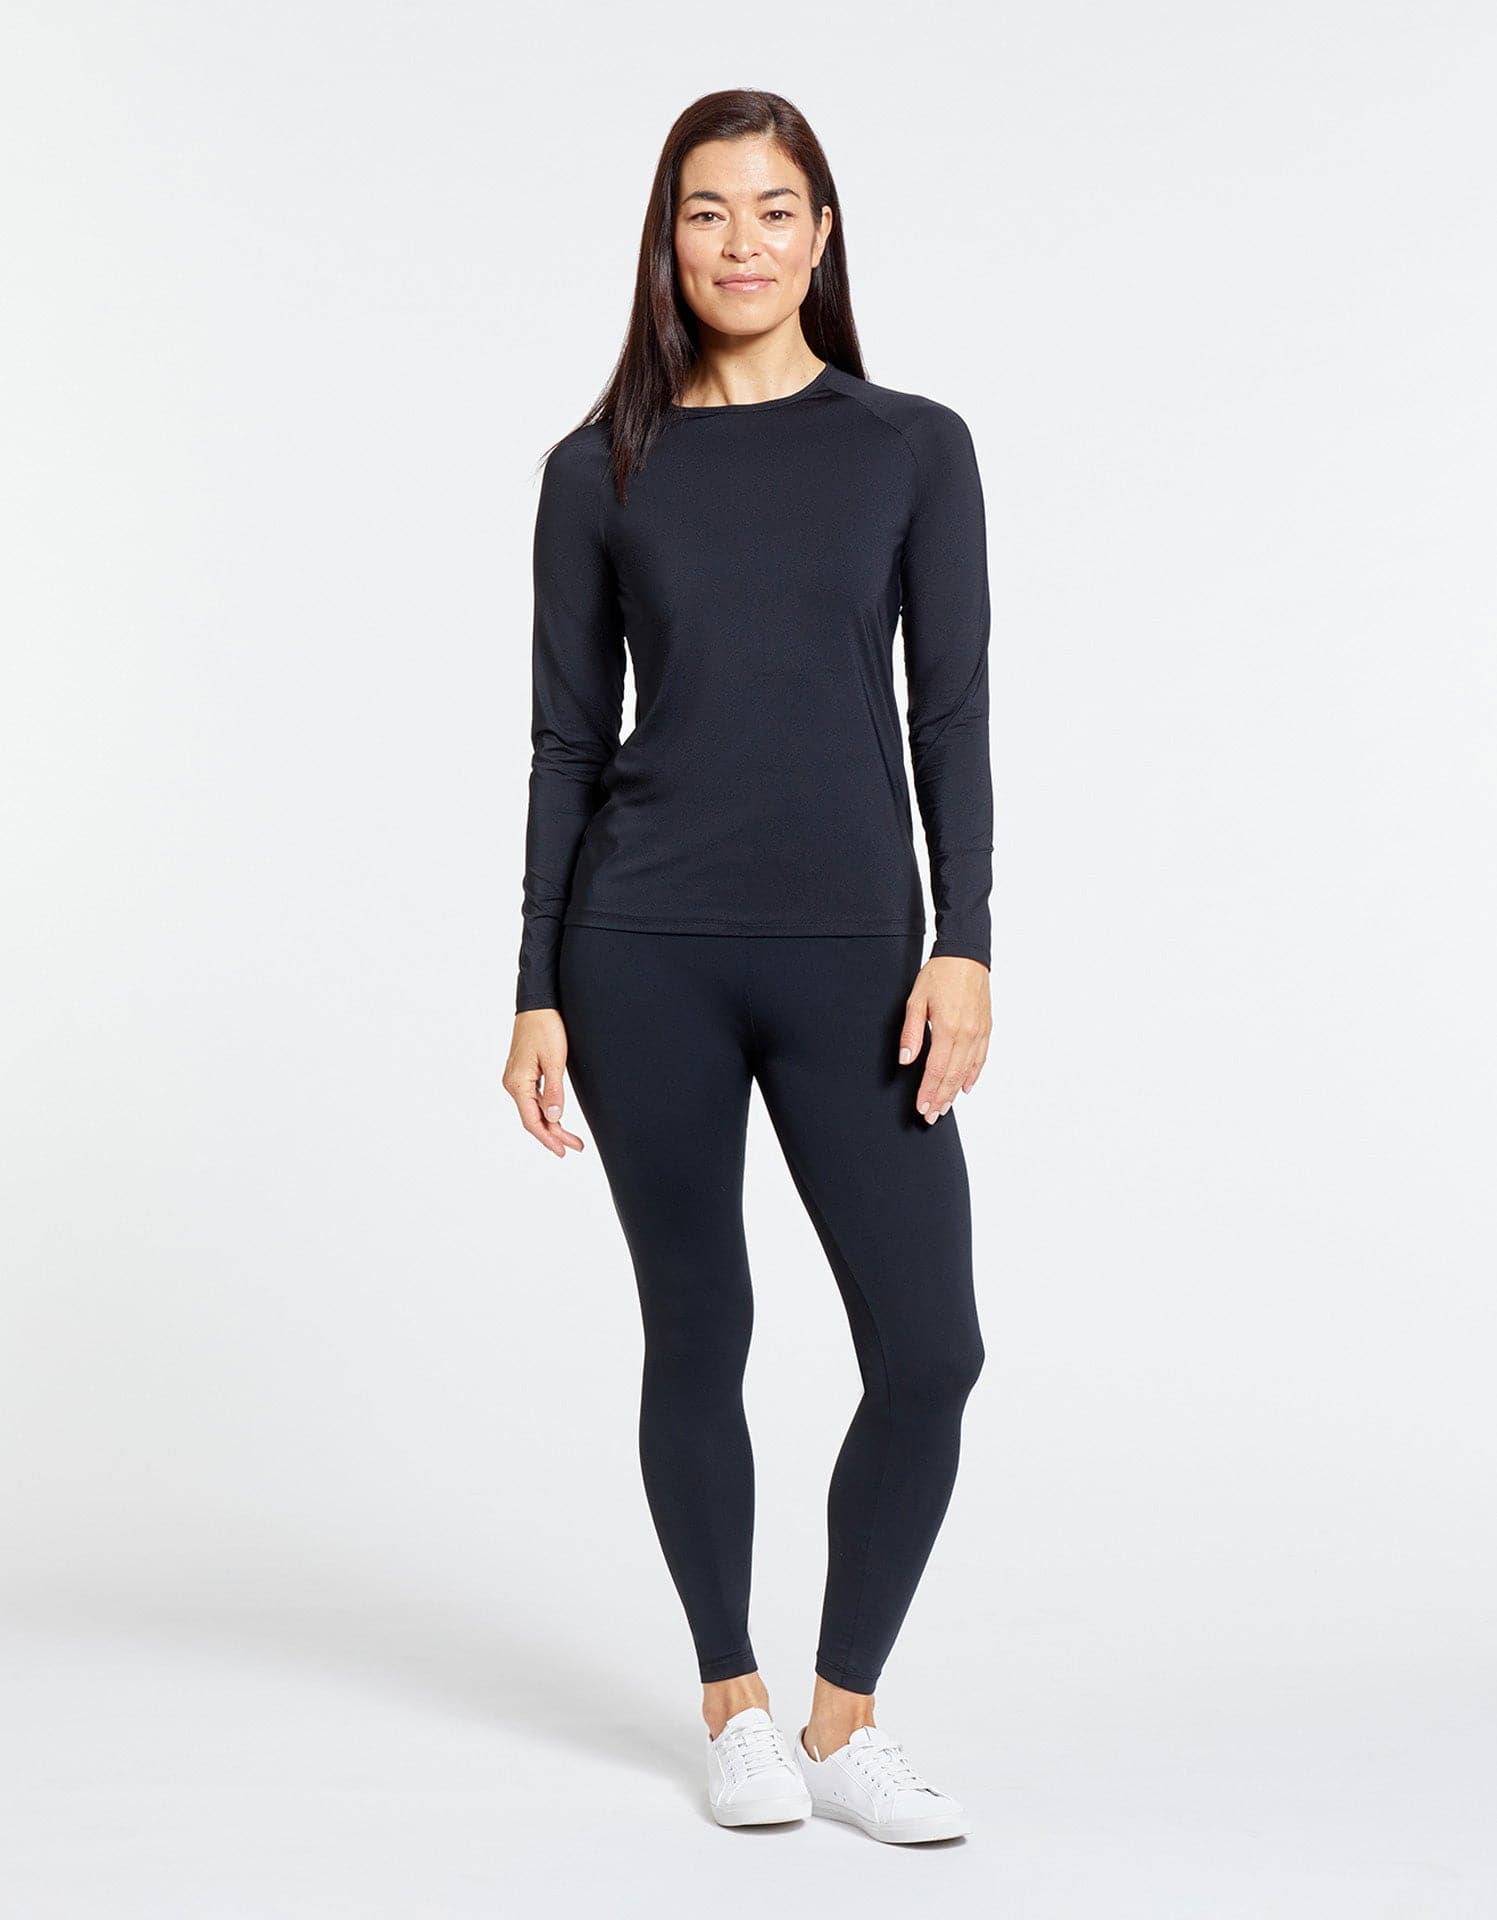 Luxe Full Length Leggings UPF50+ Sensitive Collection Size Guide – Solbari